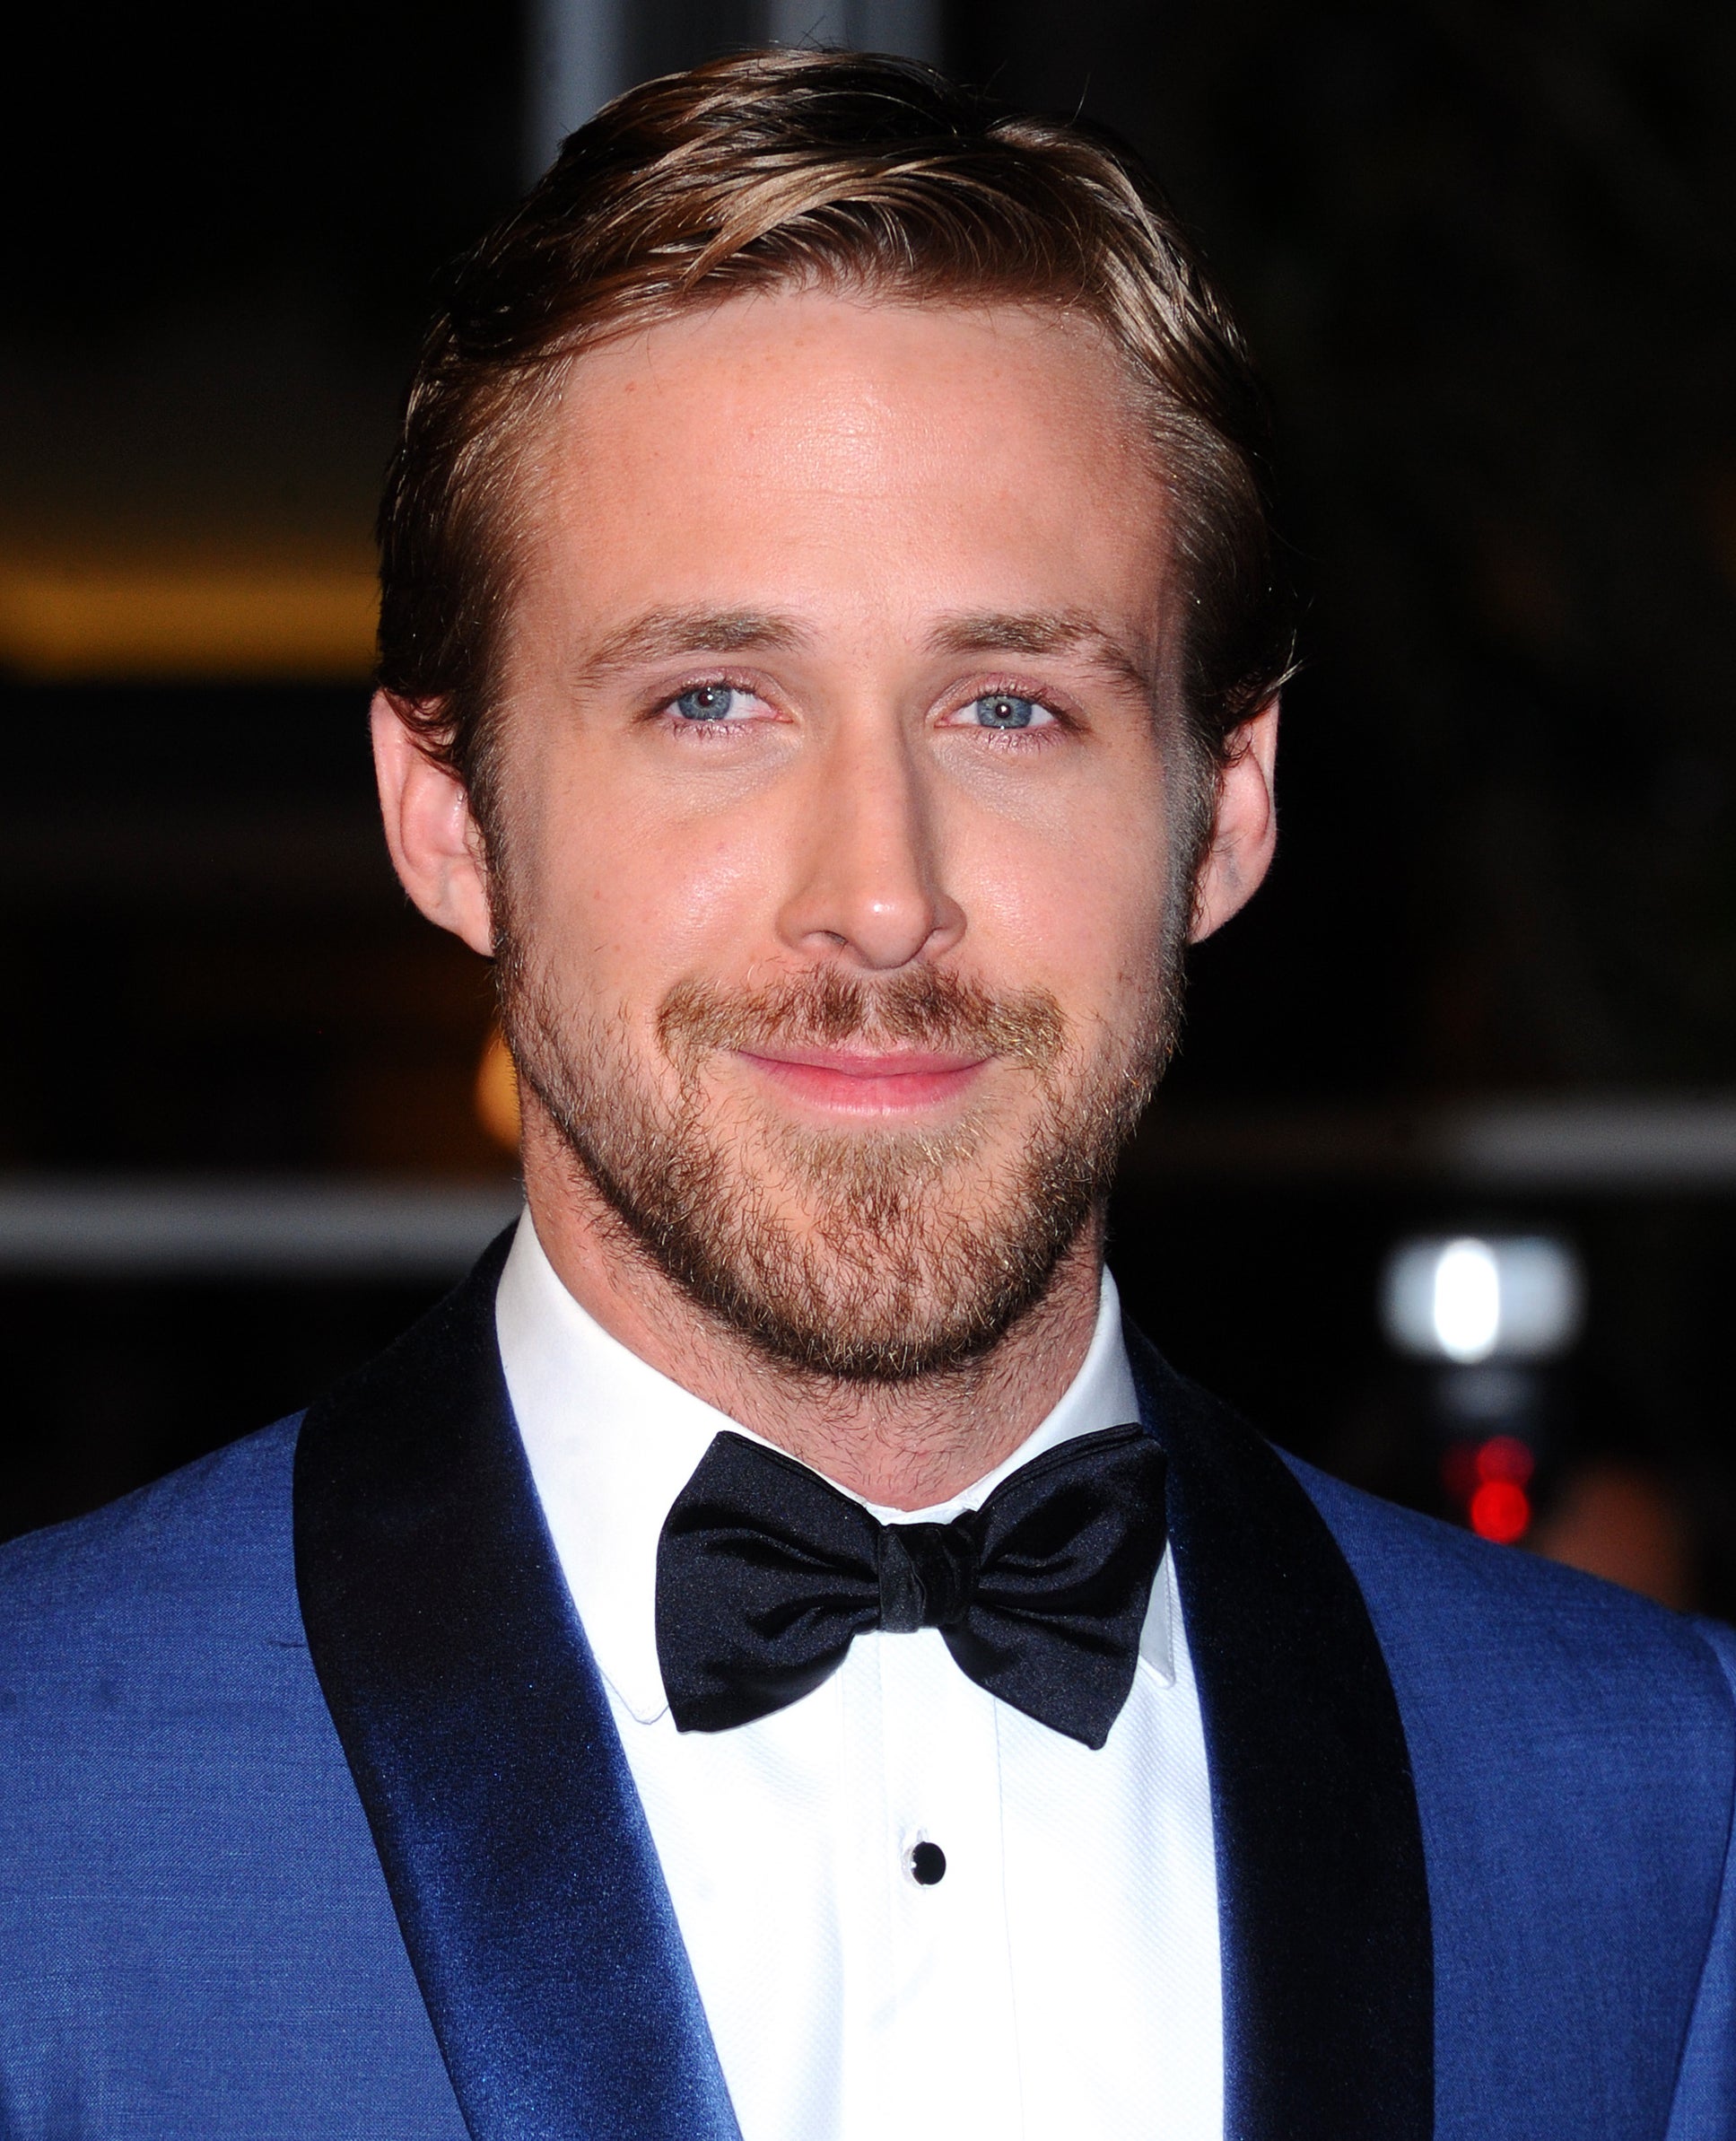 A close-up of Ryan wearing a suit and bow tie